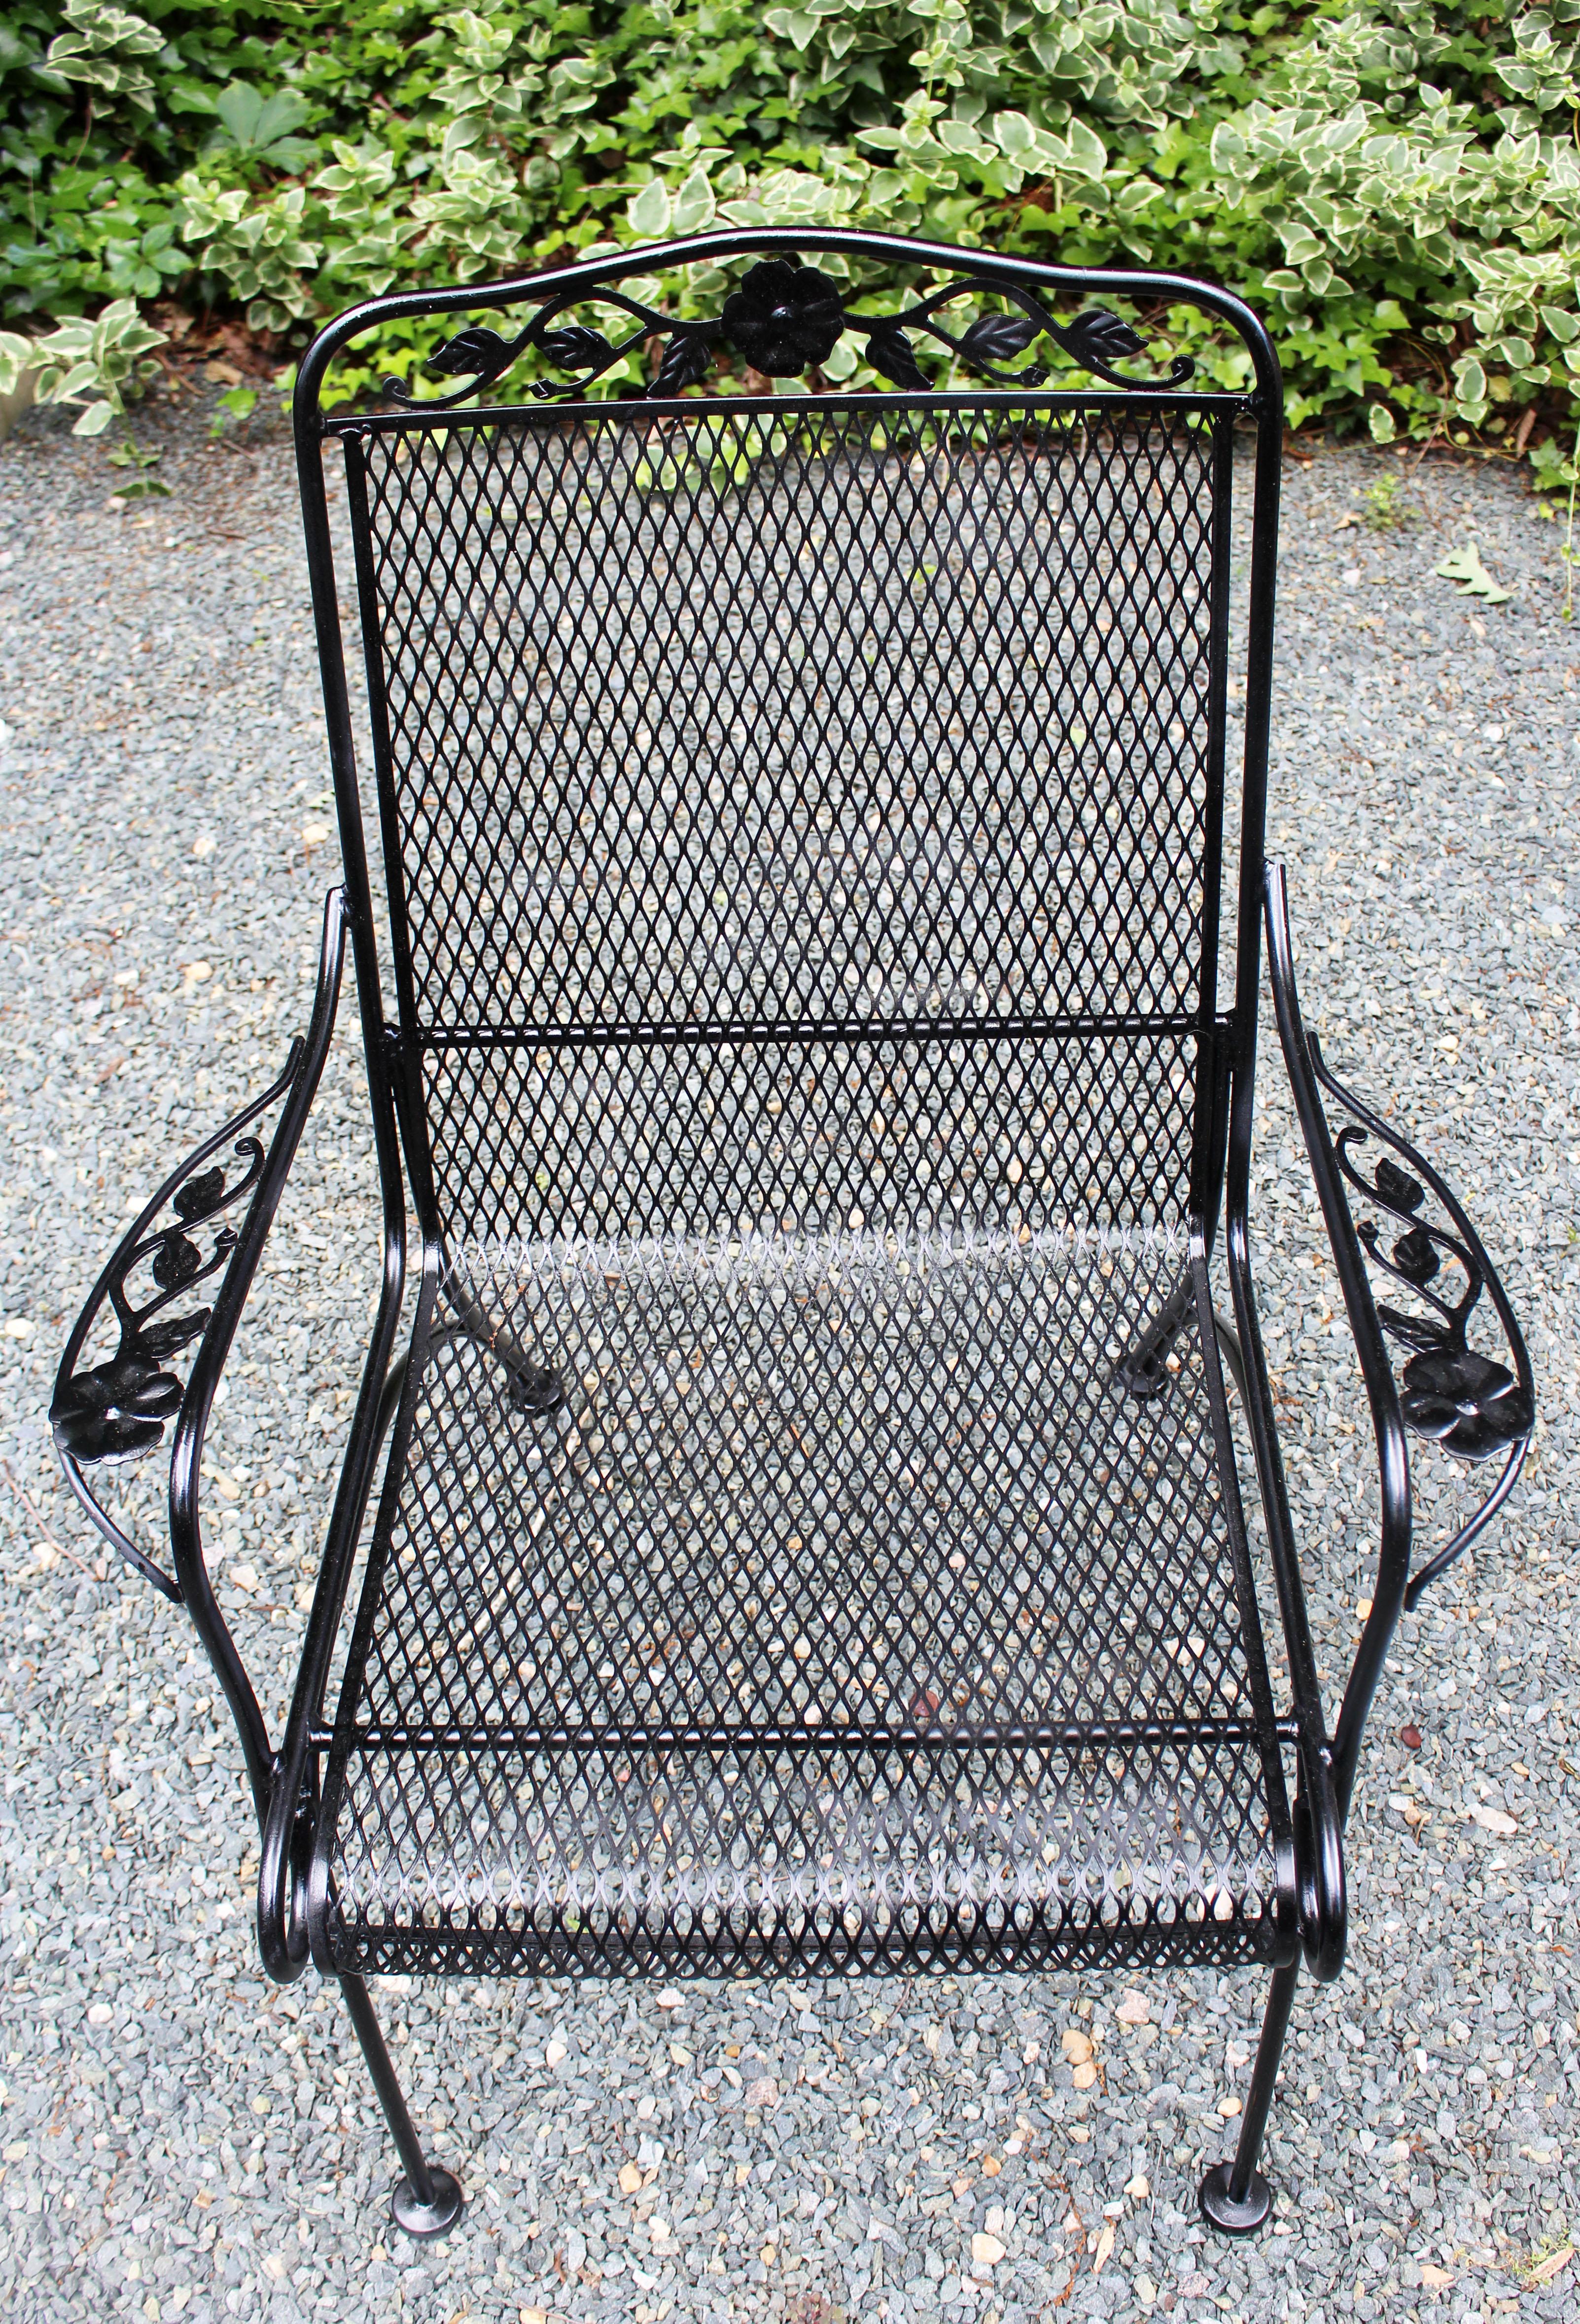 Wrought iron arm chair, mid-20th century, attributed to Russell Woodard. Daisy medallion with leaf tendrils on crest and arms. Rolled seat front. Sturdy, arched, outswept back legs. Repainted.
26